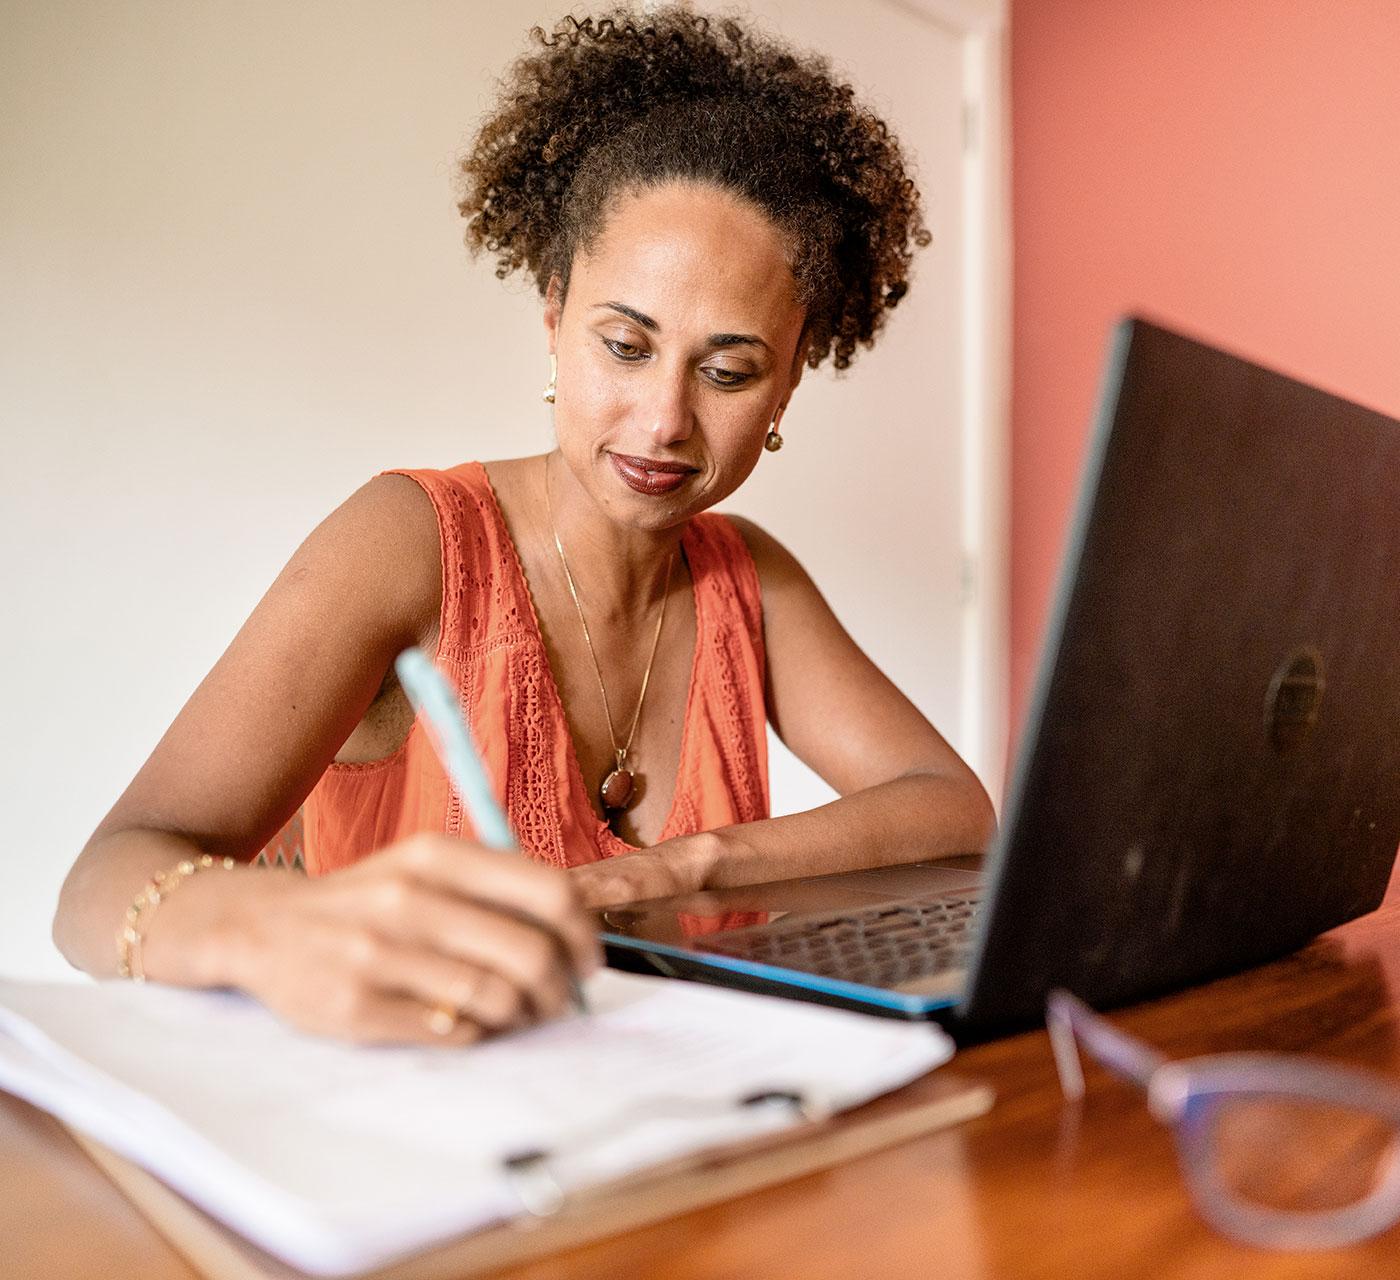 Adult woman with curly hair using laptop and writing notes